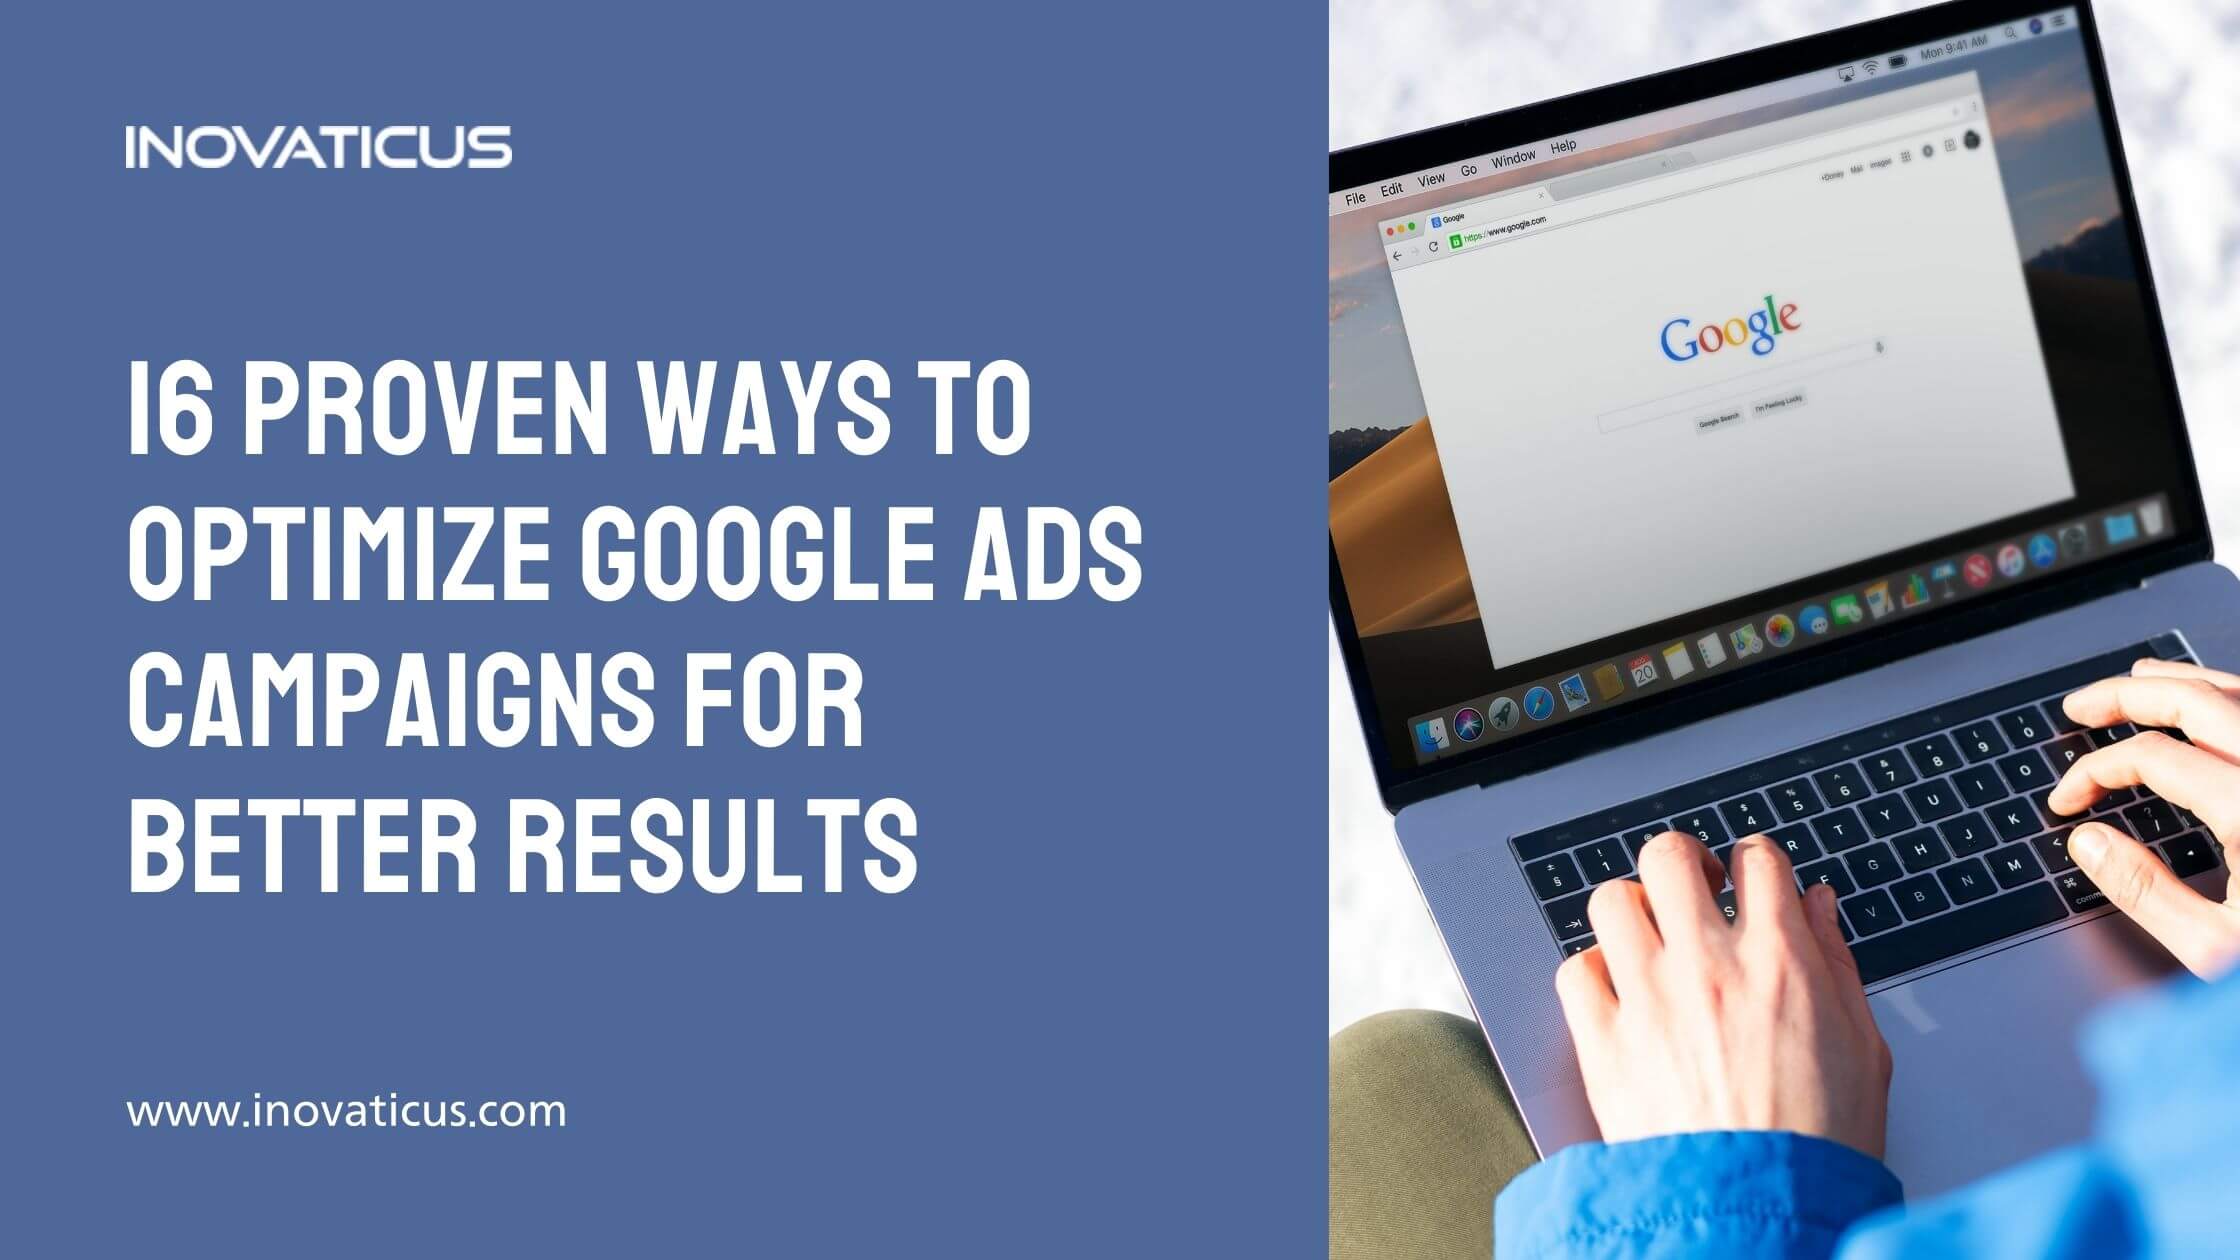 16 Proven Ways To Optimize Google Ads Campaigns For Better Results